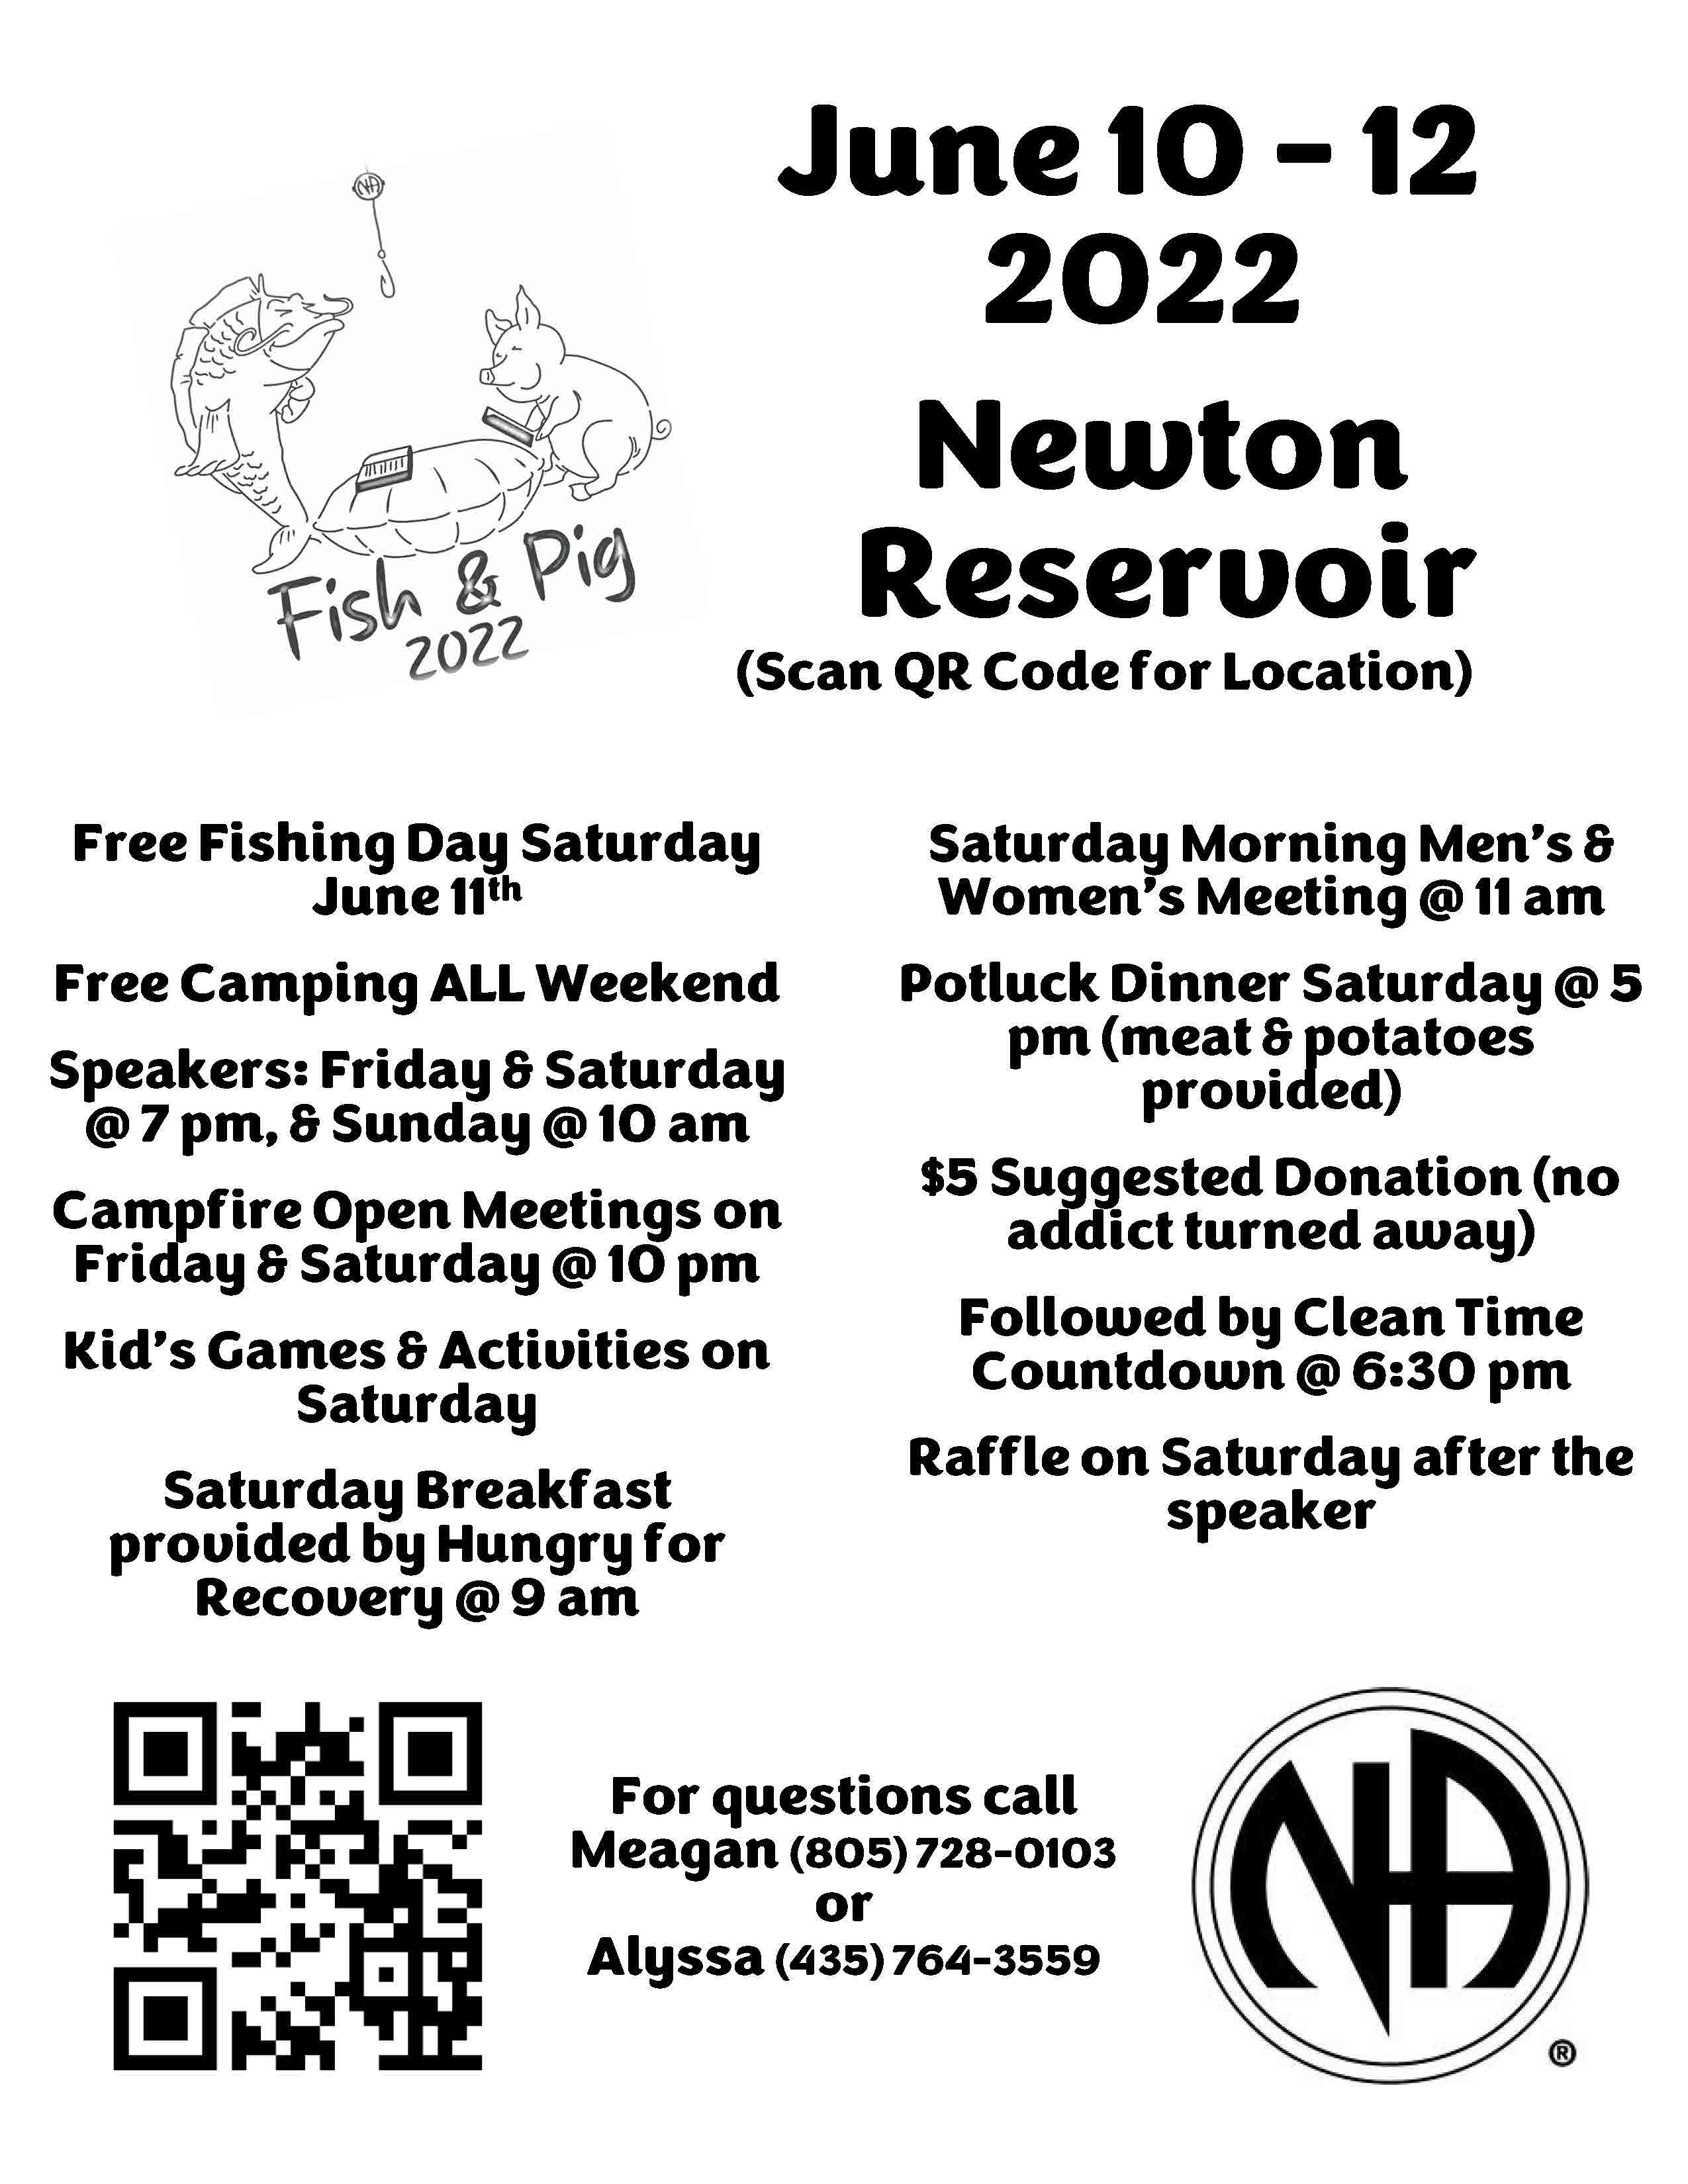 Fish and Pig flyer